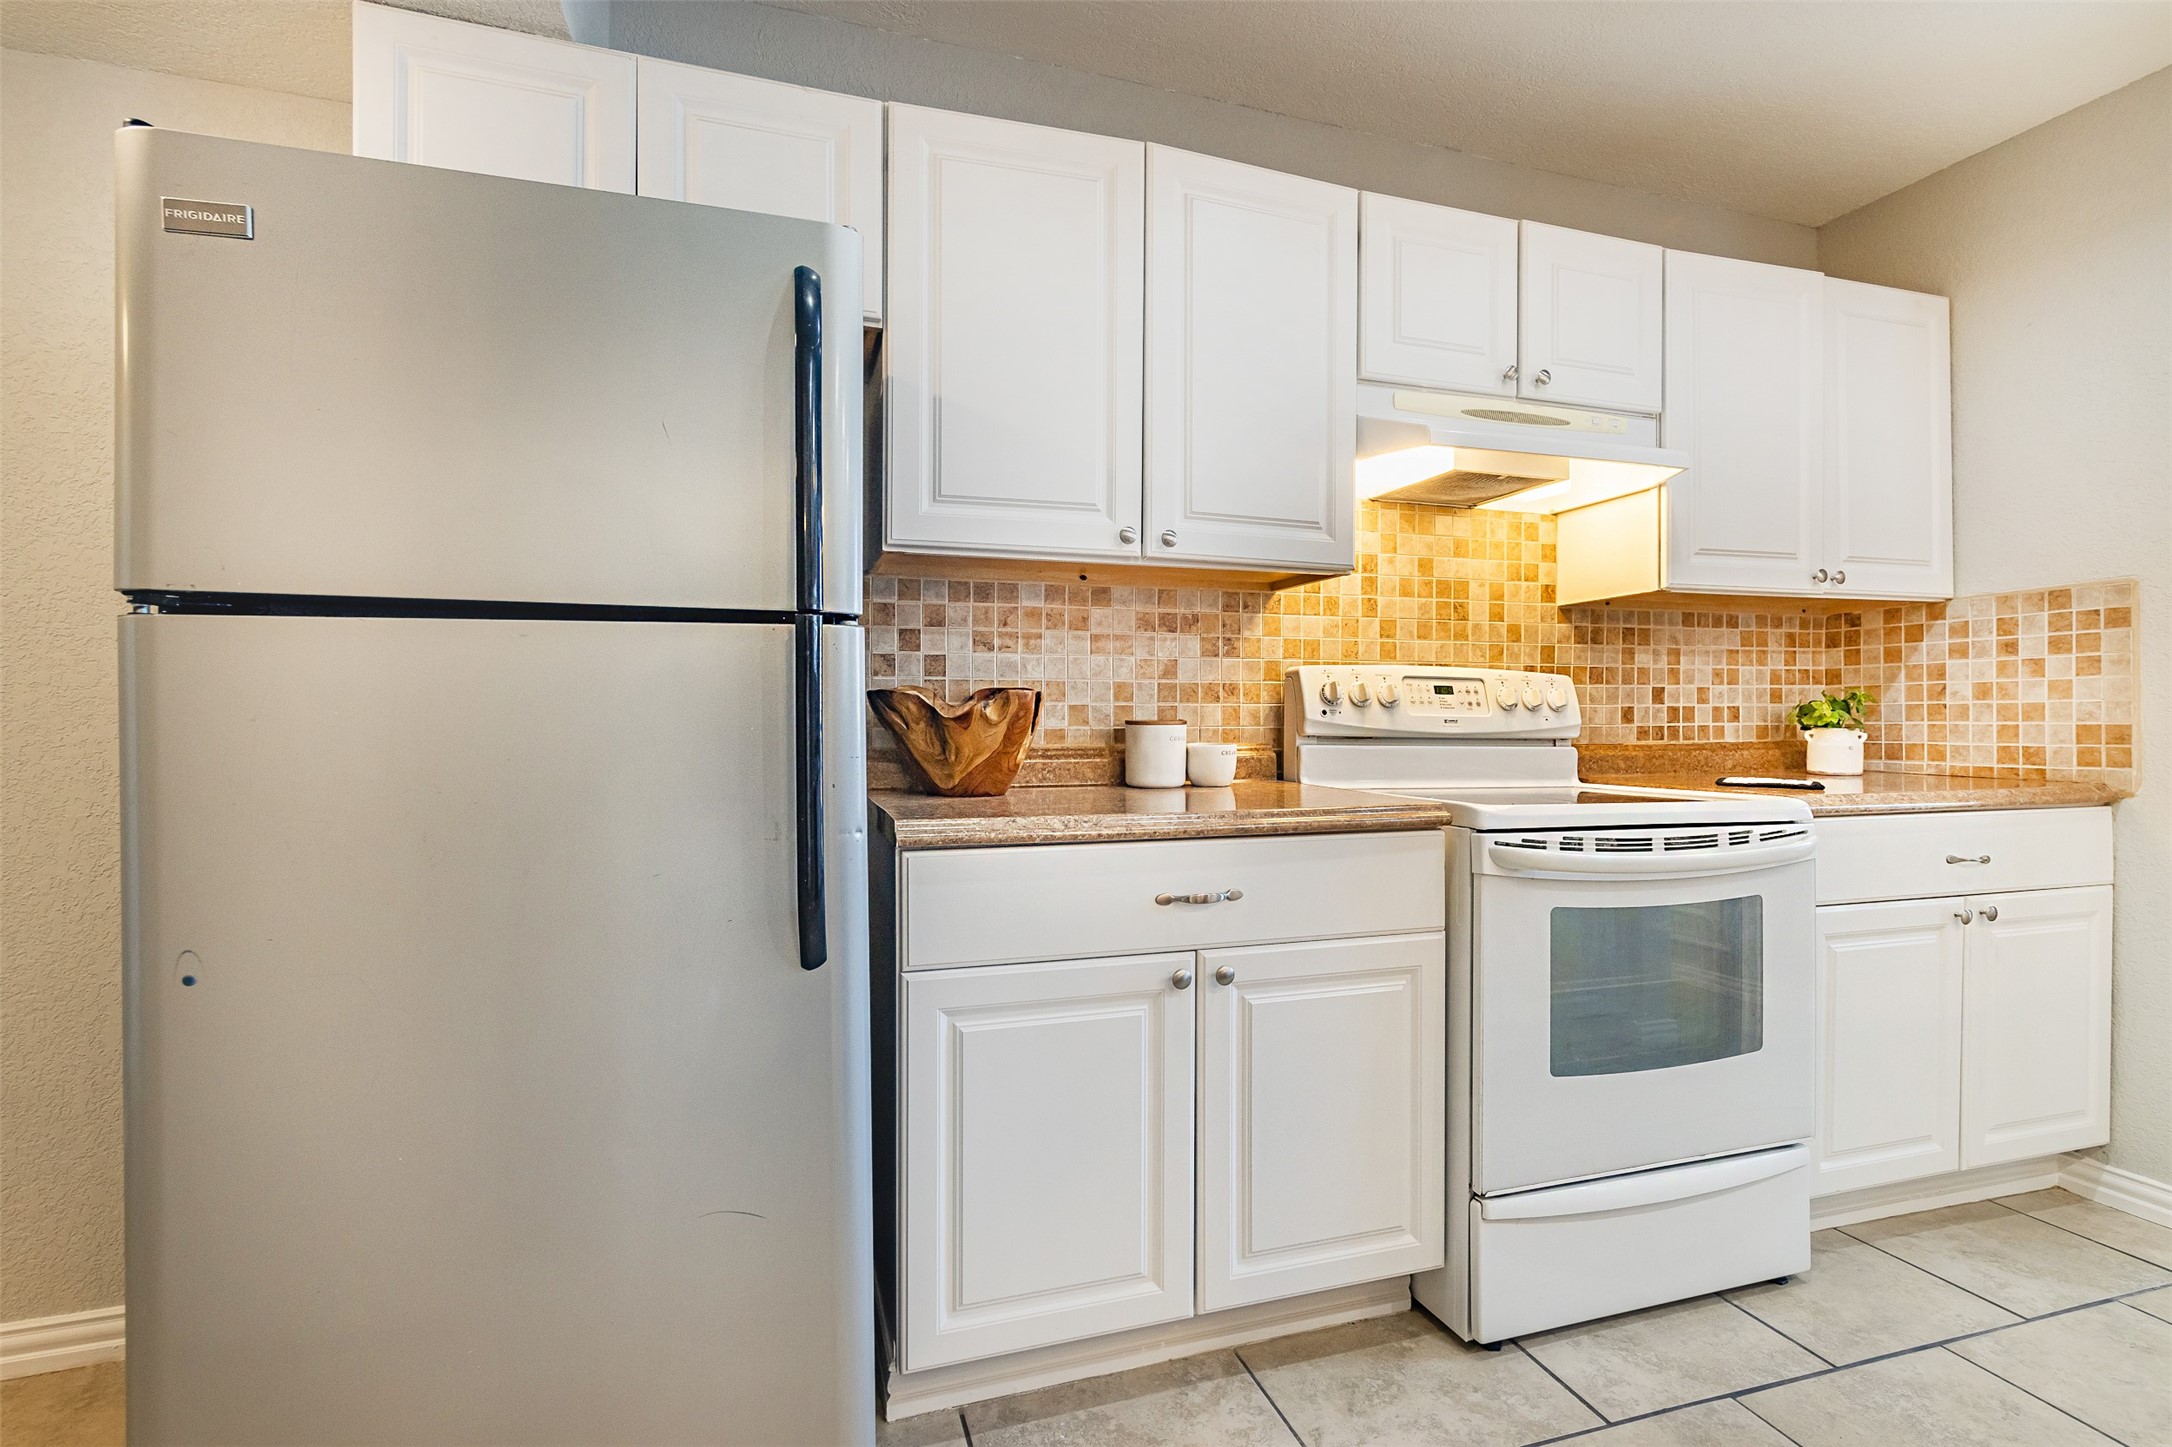 The kitchen features modern white cabinets and tile backsplash.